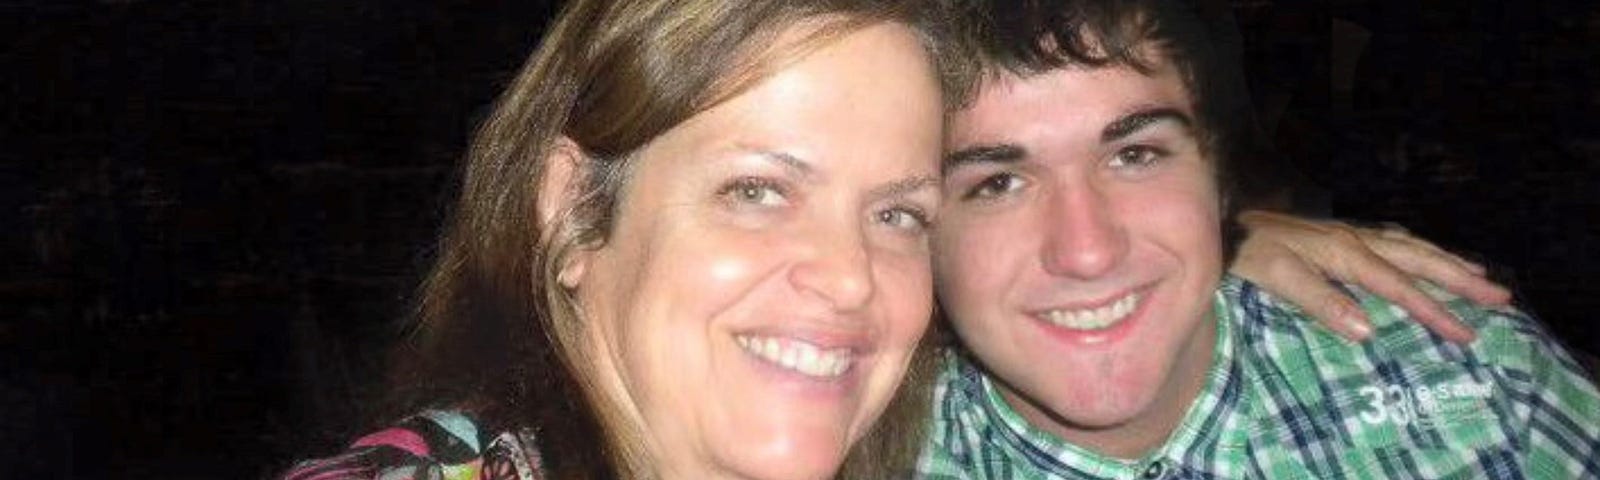 Photo of an attractive woman mid 30s to 40 with her 18-year-old son, who has dark hair and dark eyes.